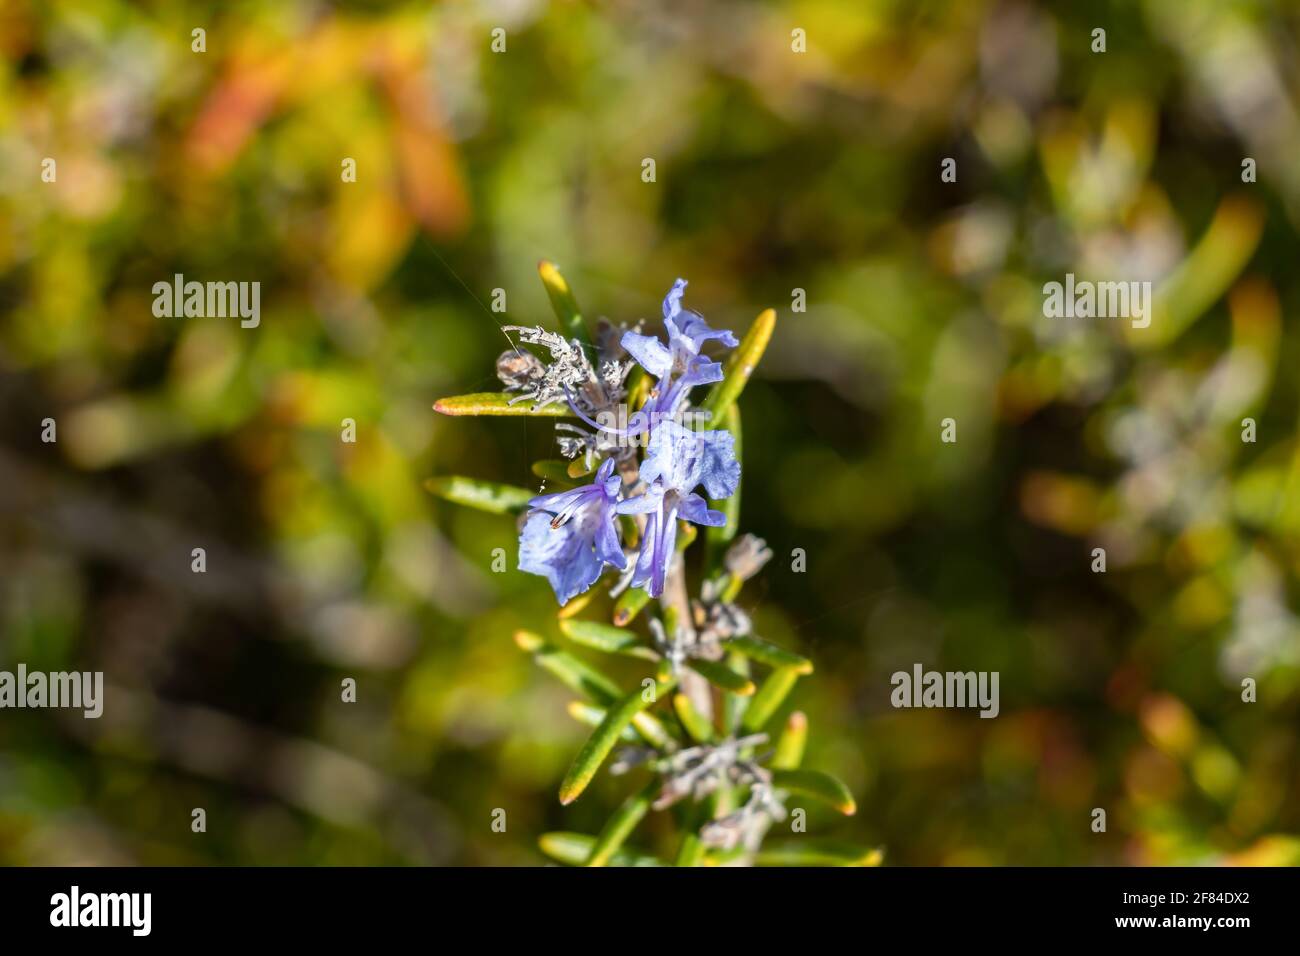 Salvia rosmarinus, commonly known as rosemary, is a shrub with fragrant, evergreen, needle-like leaves and white, pink, purple, or blue flowers, nativ Stock Photo